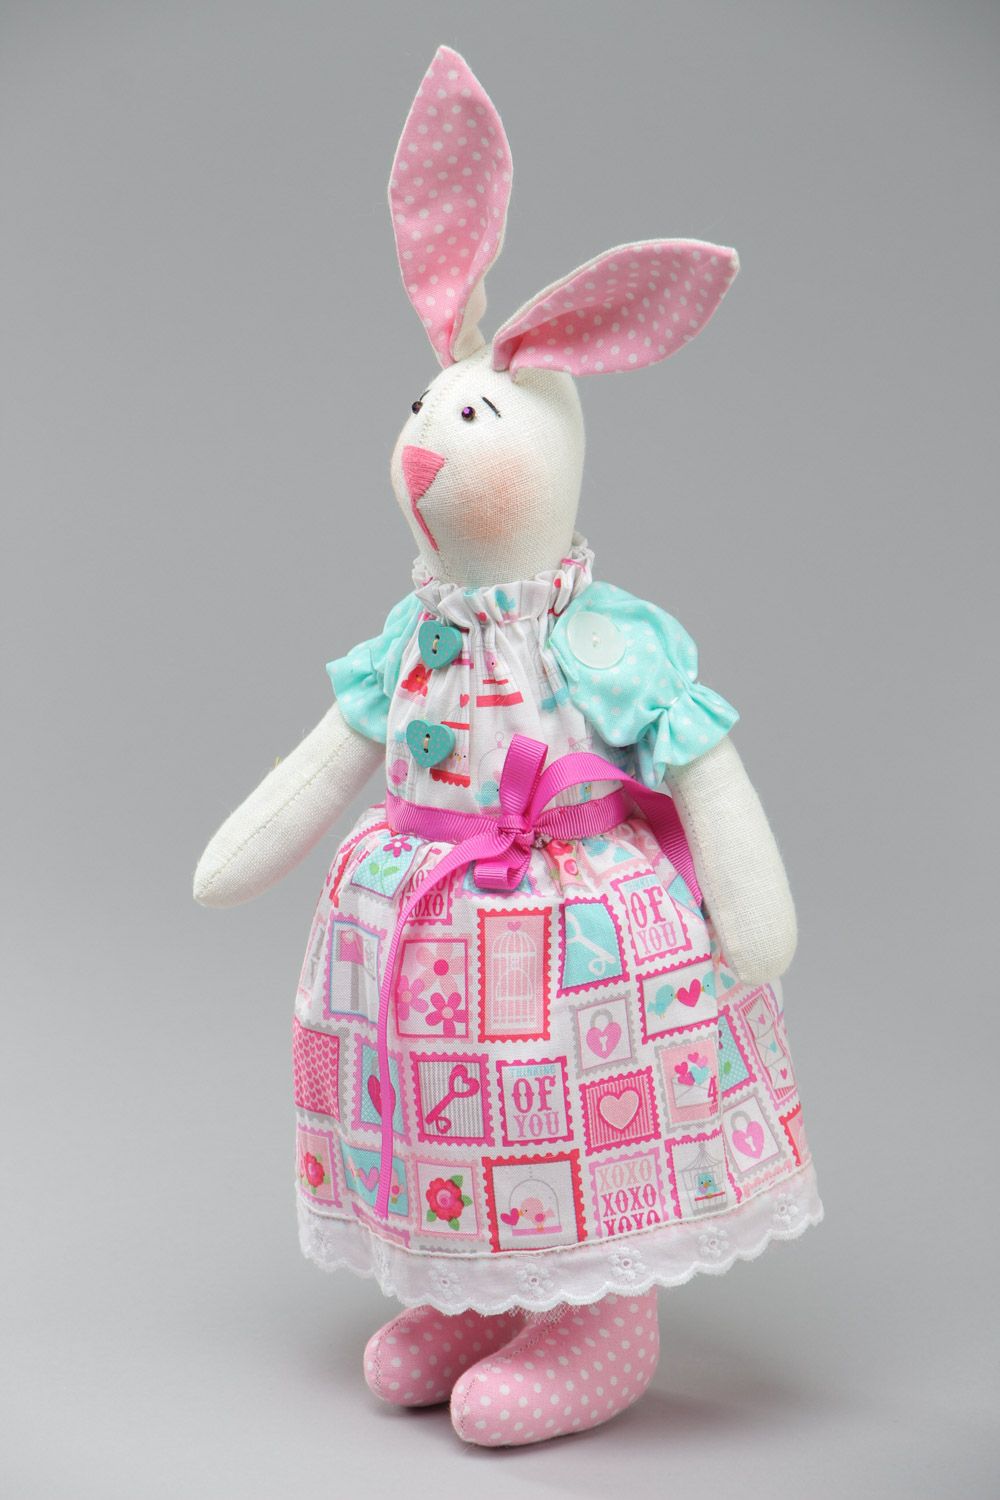 Cute handmade soft toy sewn of natural fabrics Rabbit with pink ears and dress photo 2